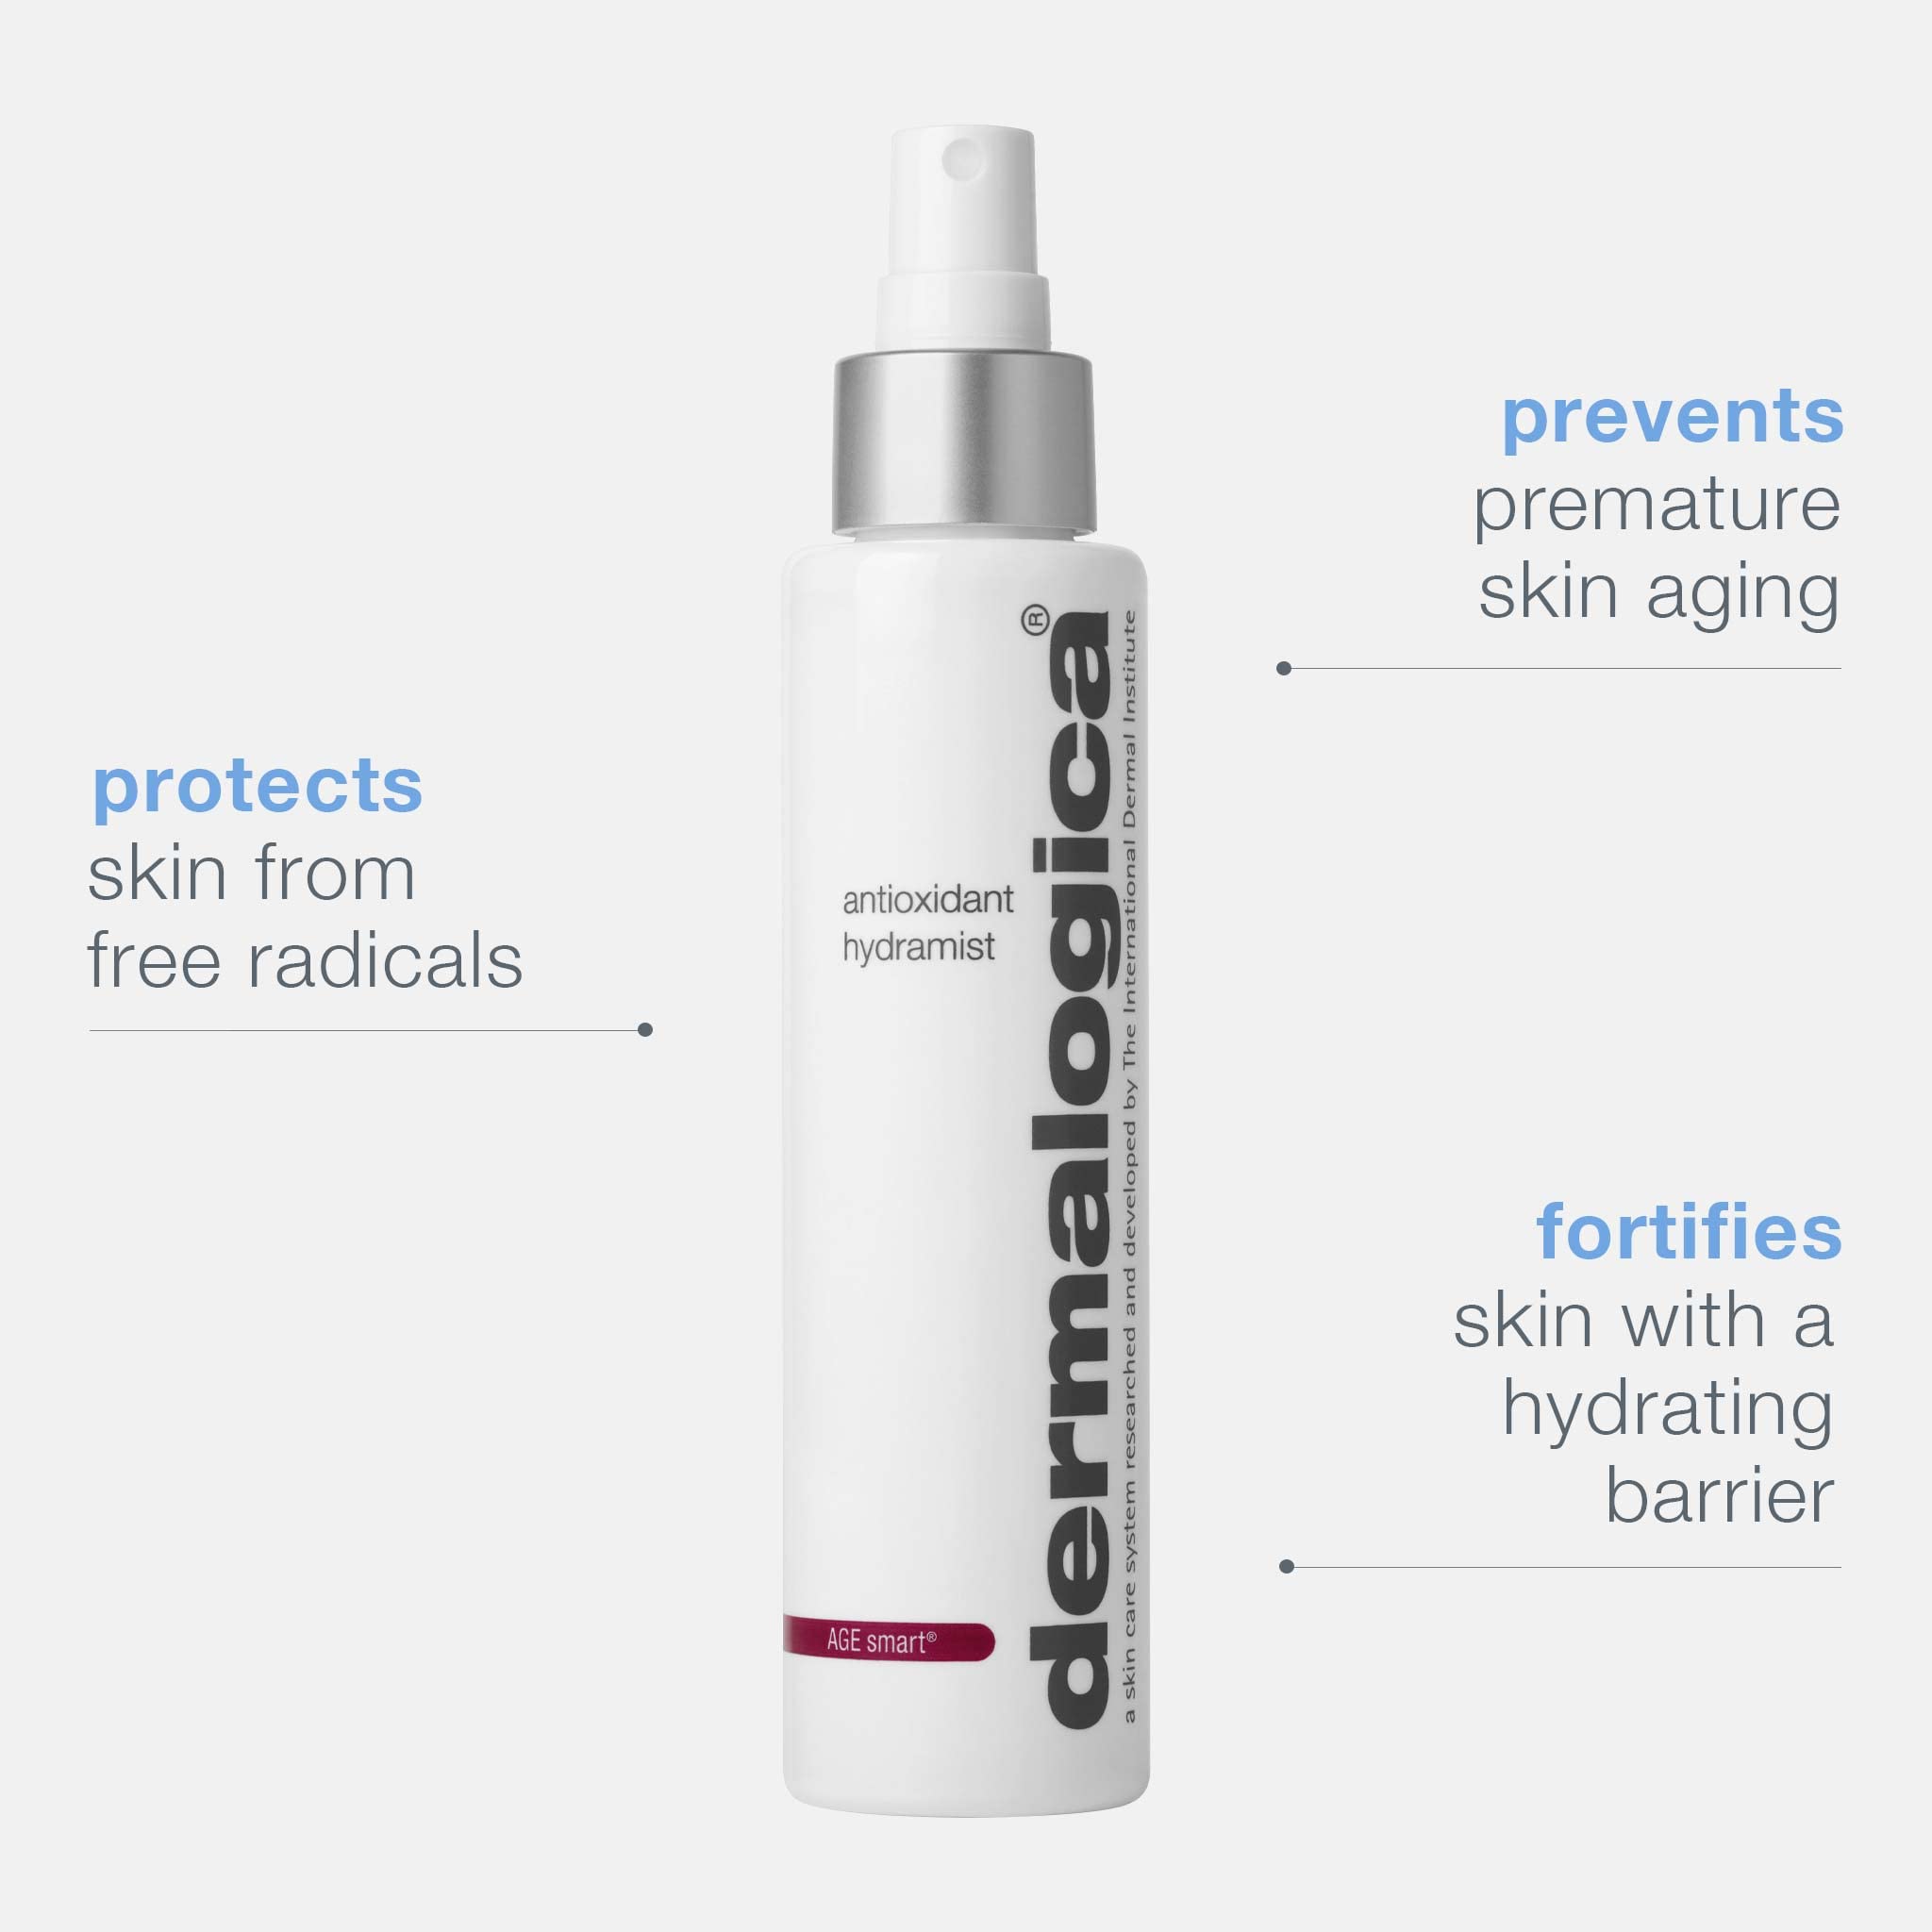 Dermalogica Antioxidant Hydramist Toner - Anti-Aging Toner Spray for Face that helps Firm and Hydrate Skin - For Use Throughout the Day